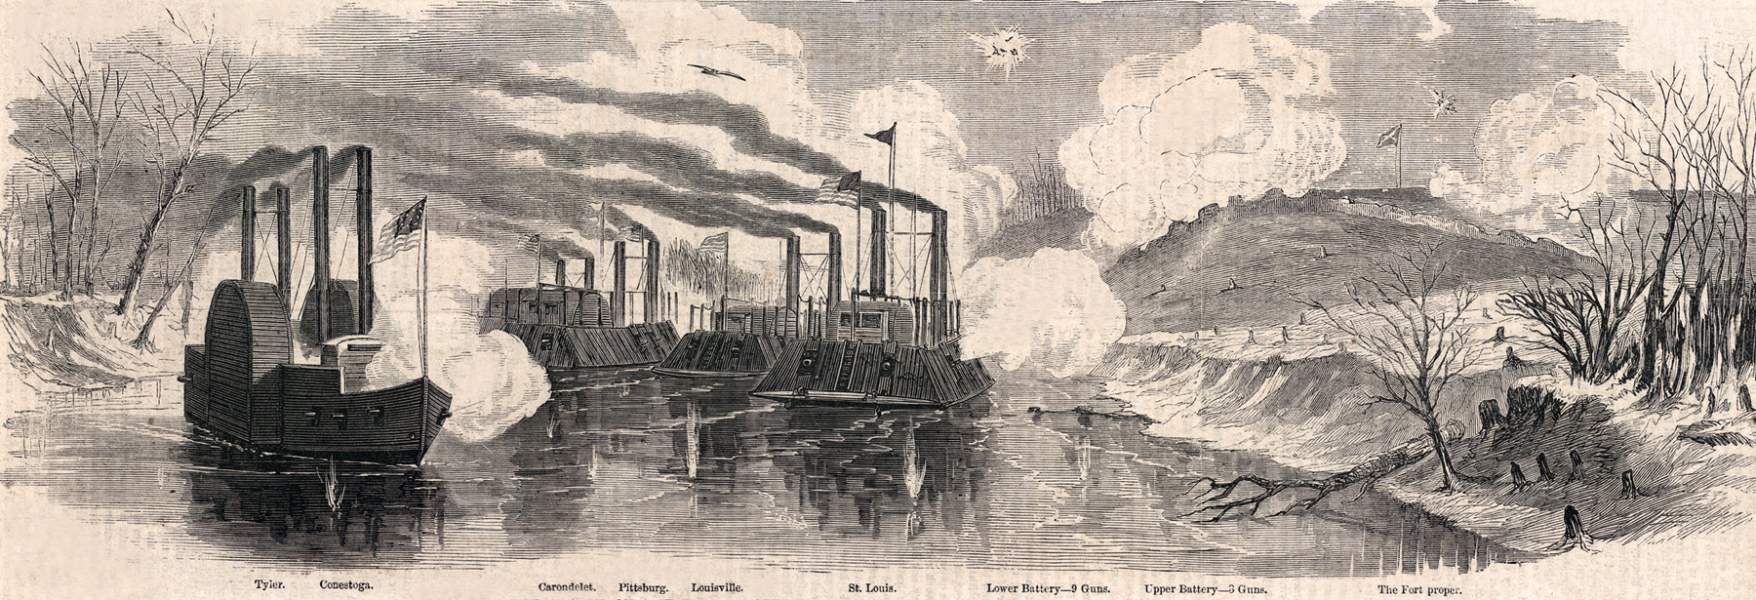 Union Gunboats attacking Fort Donelson, Tennessee, February 1862, artist's impression, zoomable image